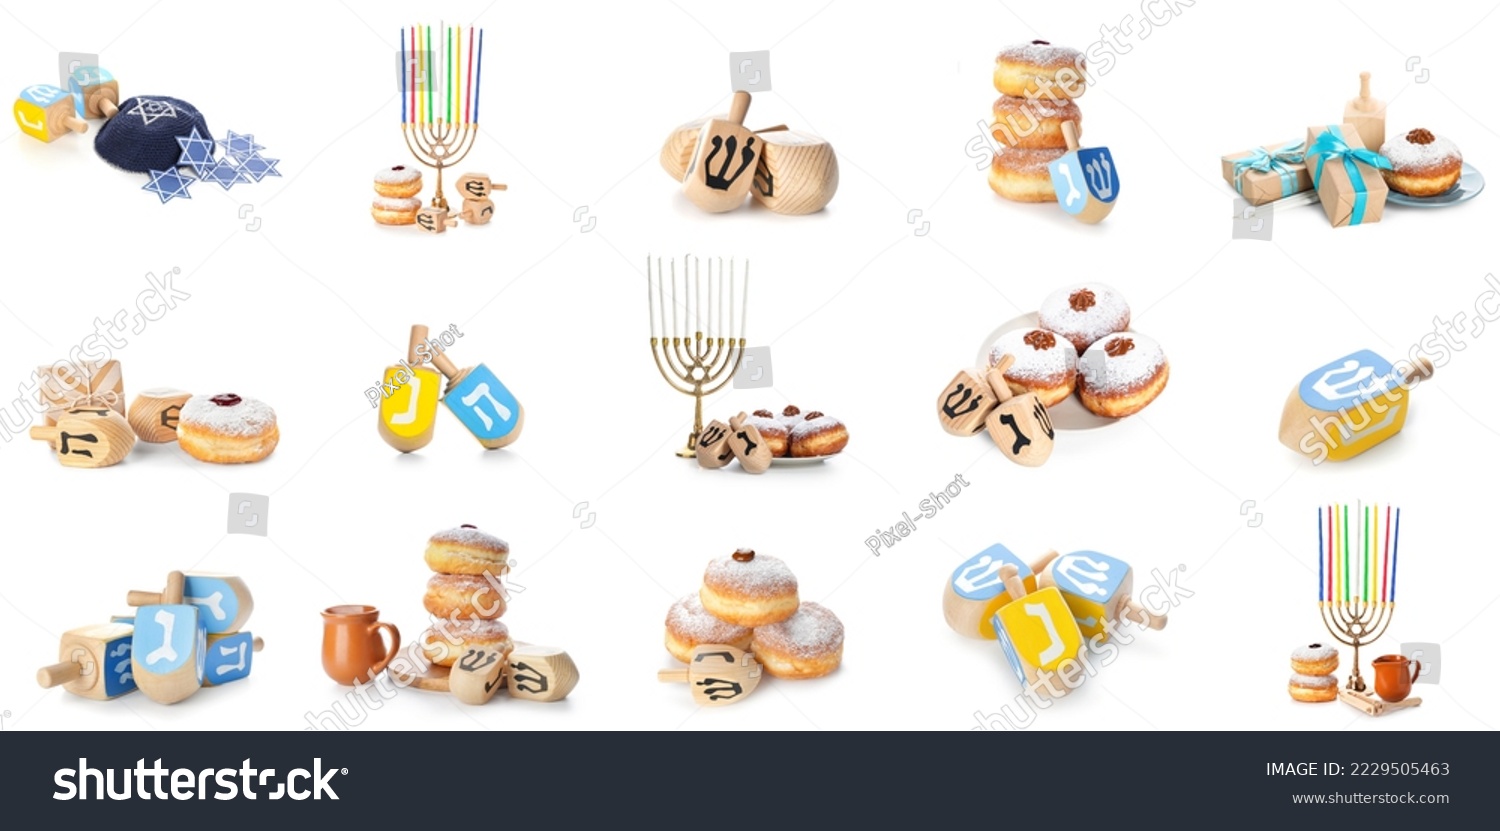 Set of menorahs with donuts and dreidels for Hanukkah isolated on white #2229505463